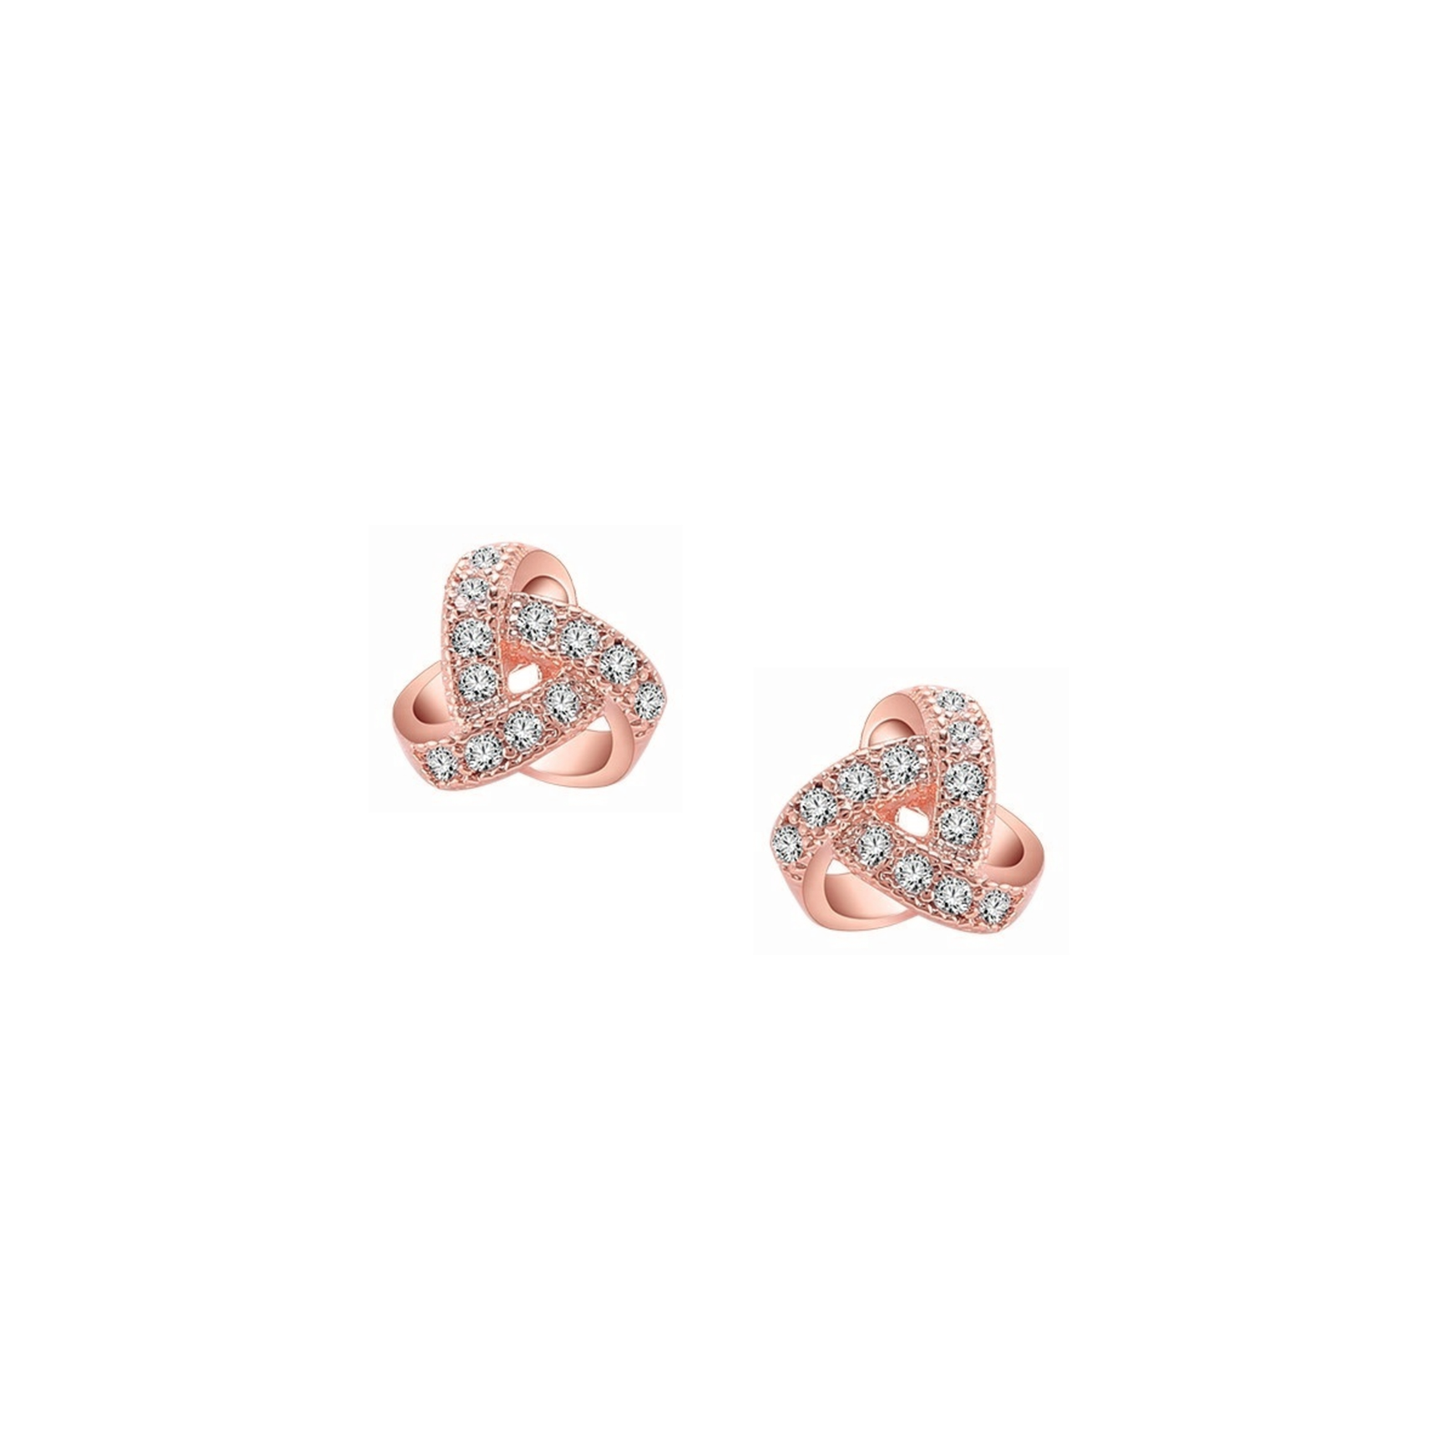 trinity knot earrings rose gold